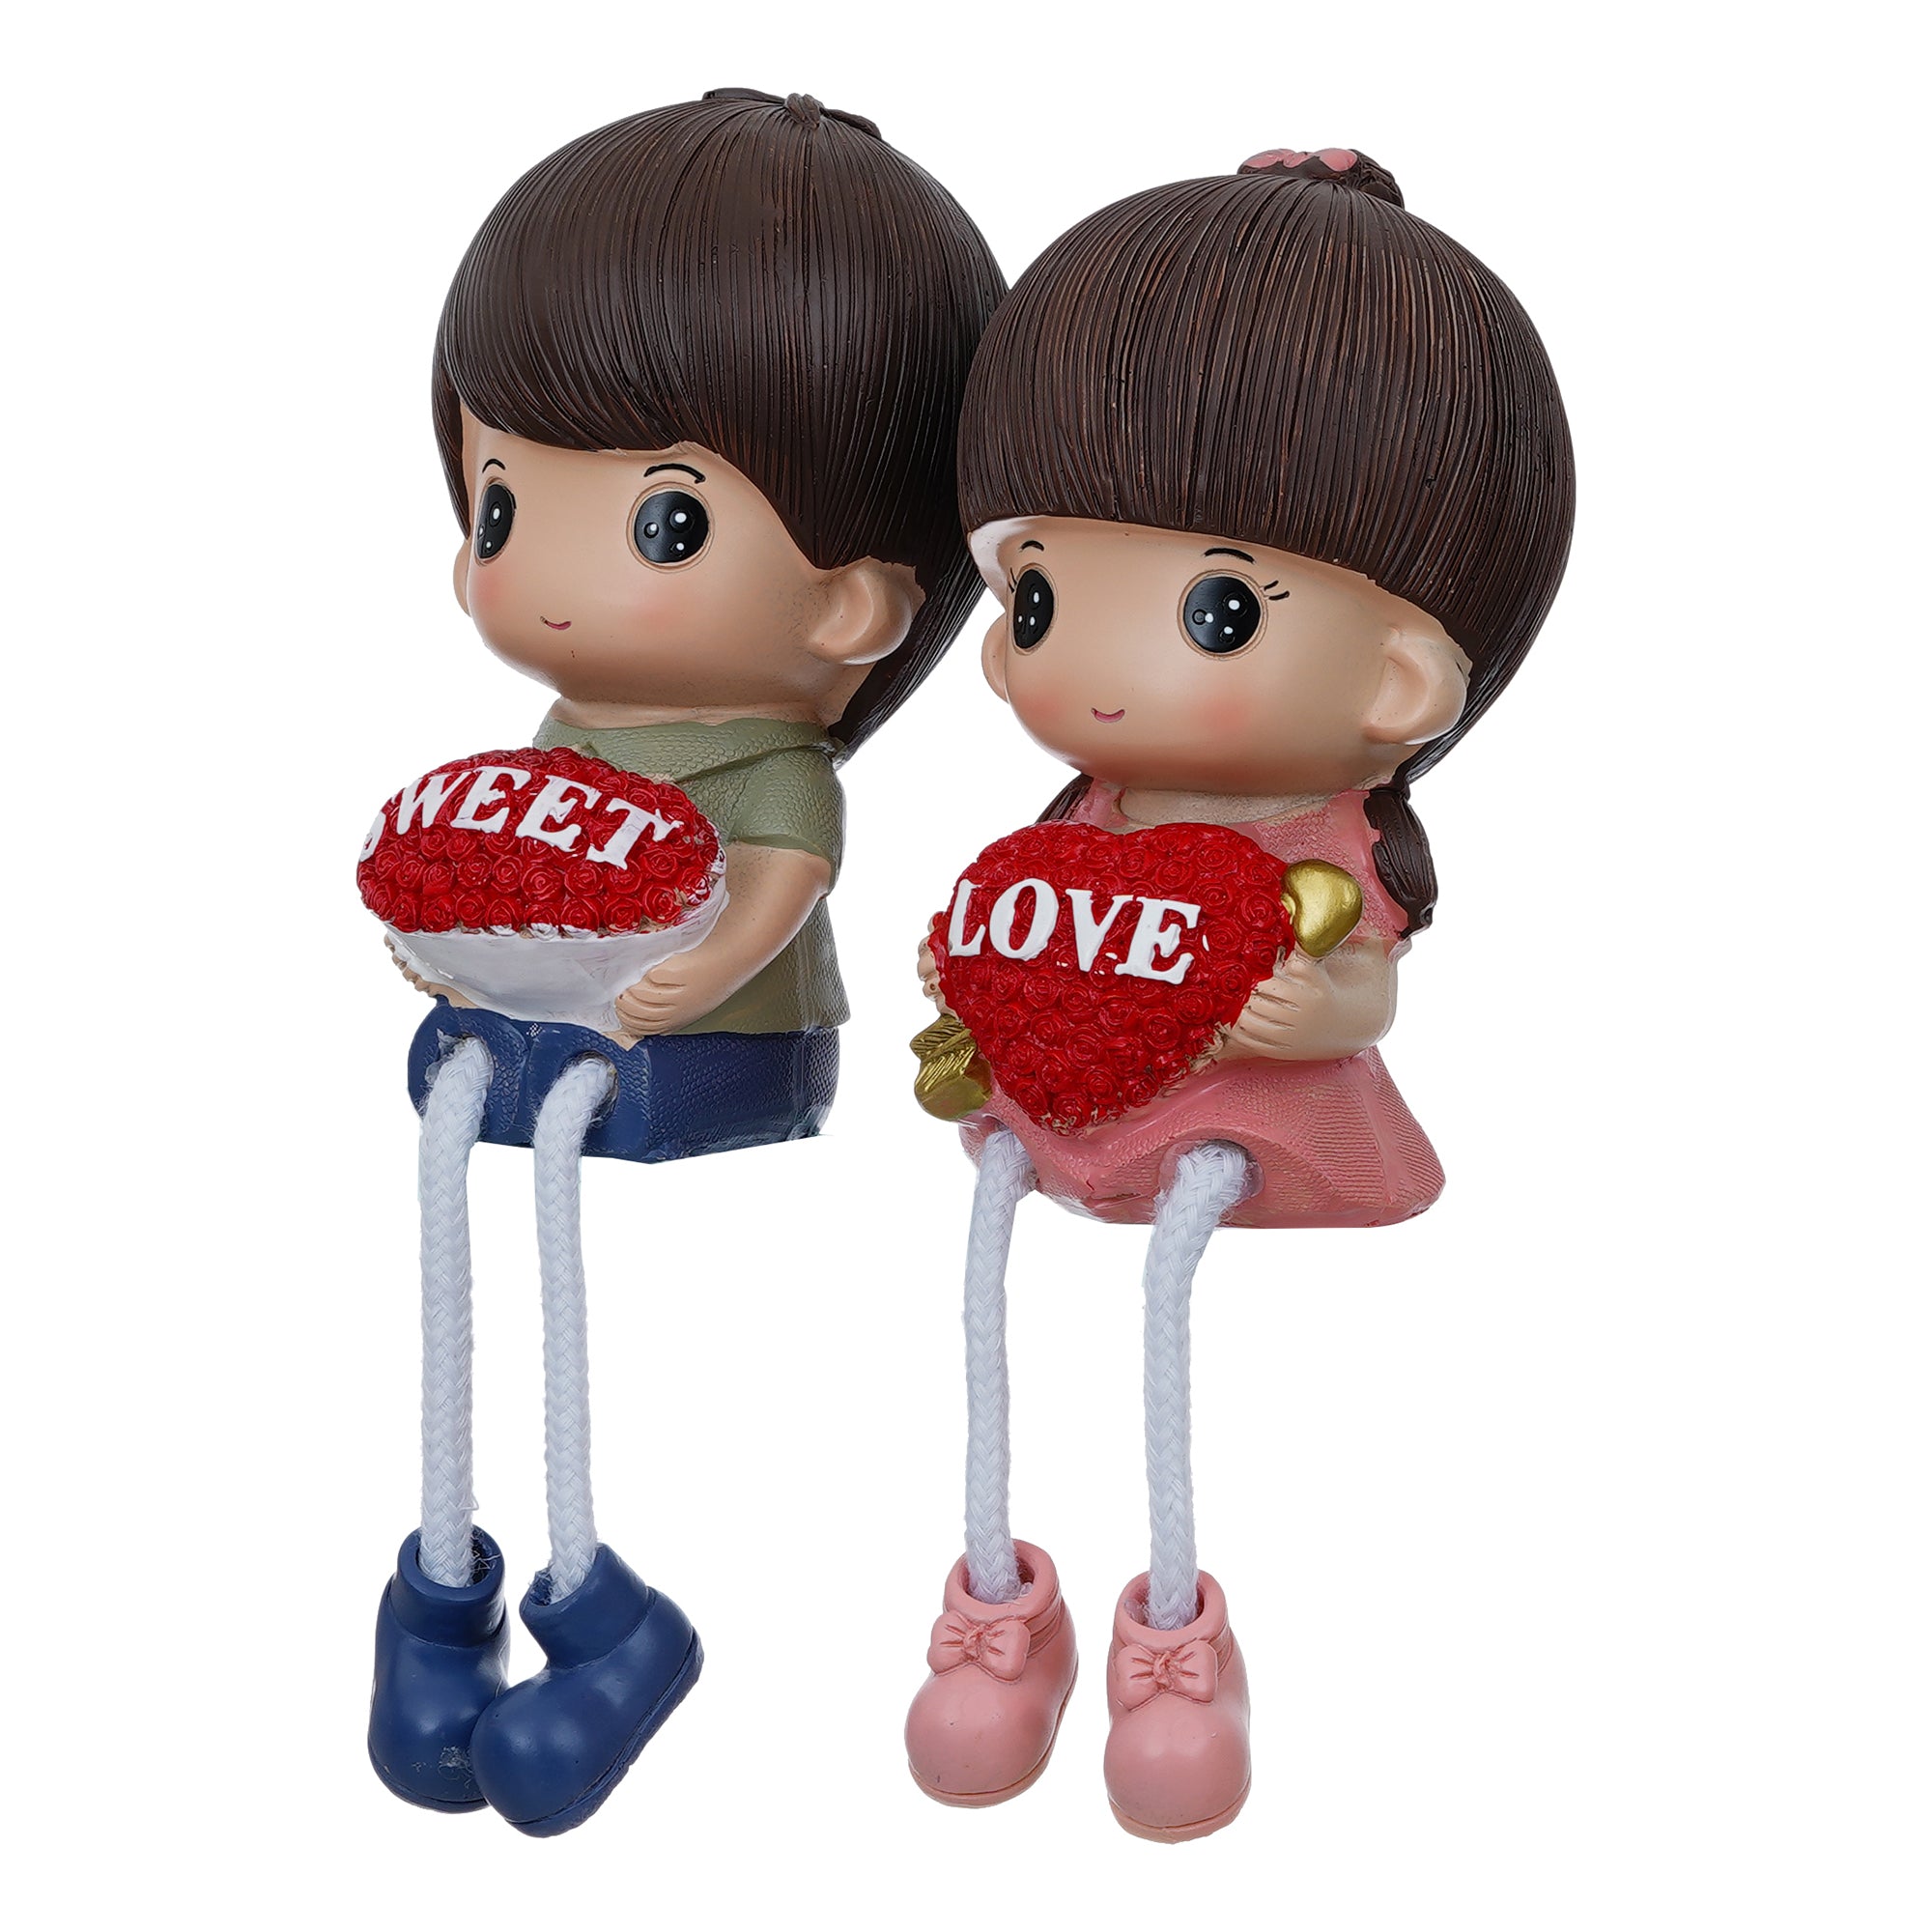 Valentine Combo of Colorful Sweet Love Girl & Boy Figurine, White Cycle with Teddy Bear and Rose Petals Gift Box 7